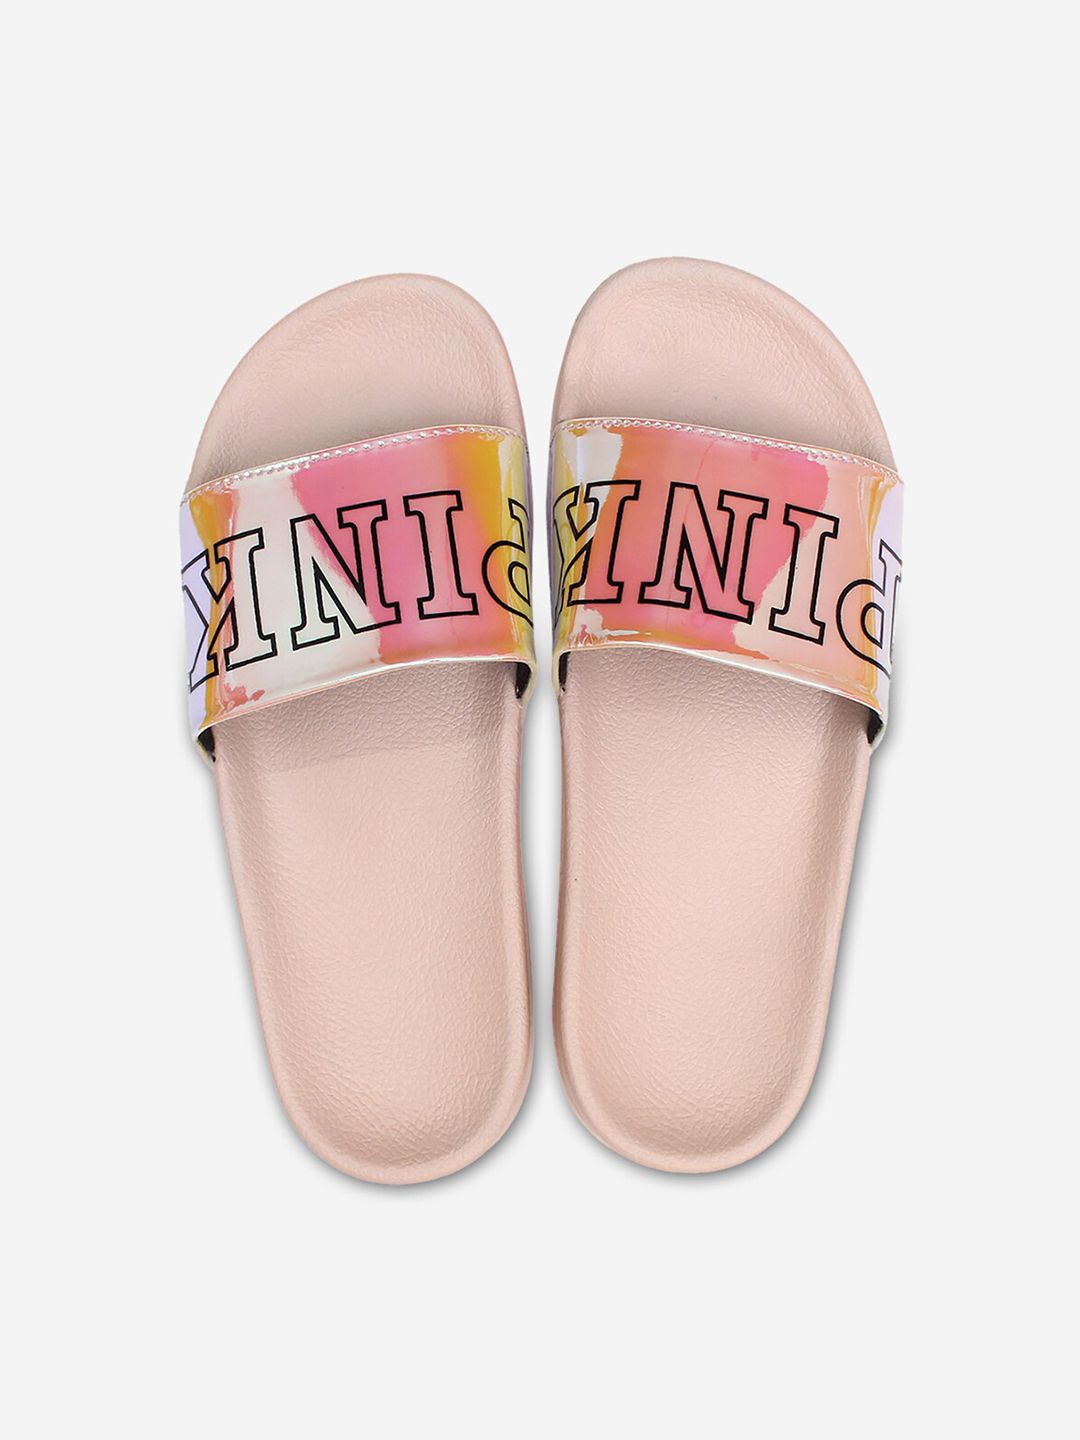 ADIVER Women Pink & White Printed Sliders Price in India